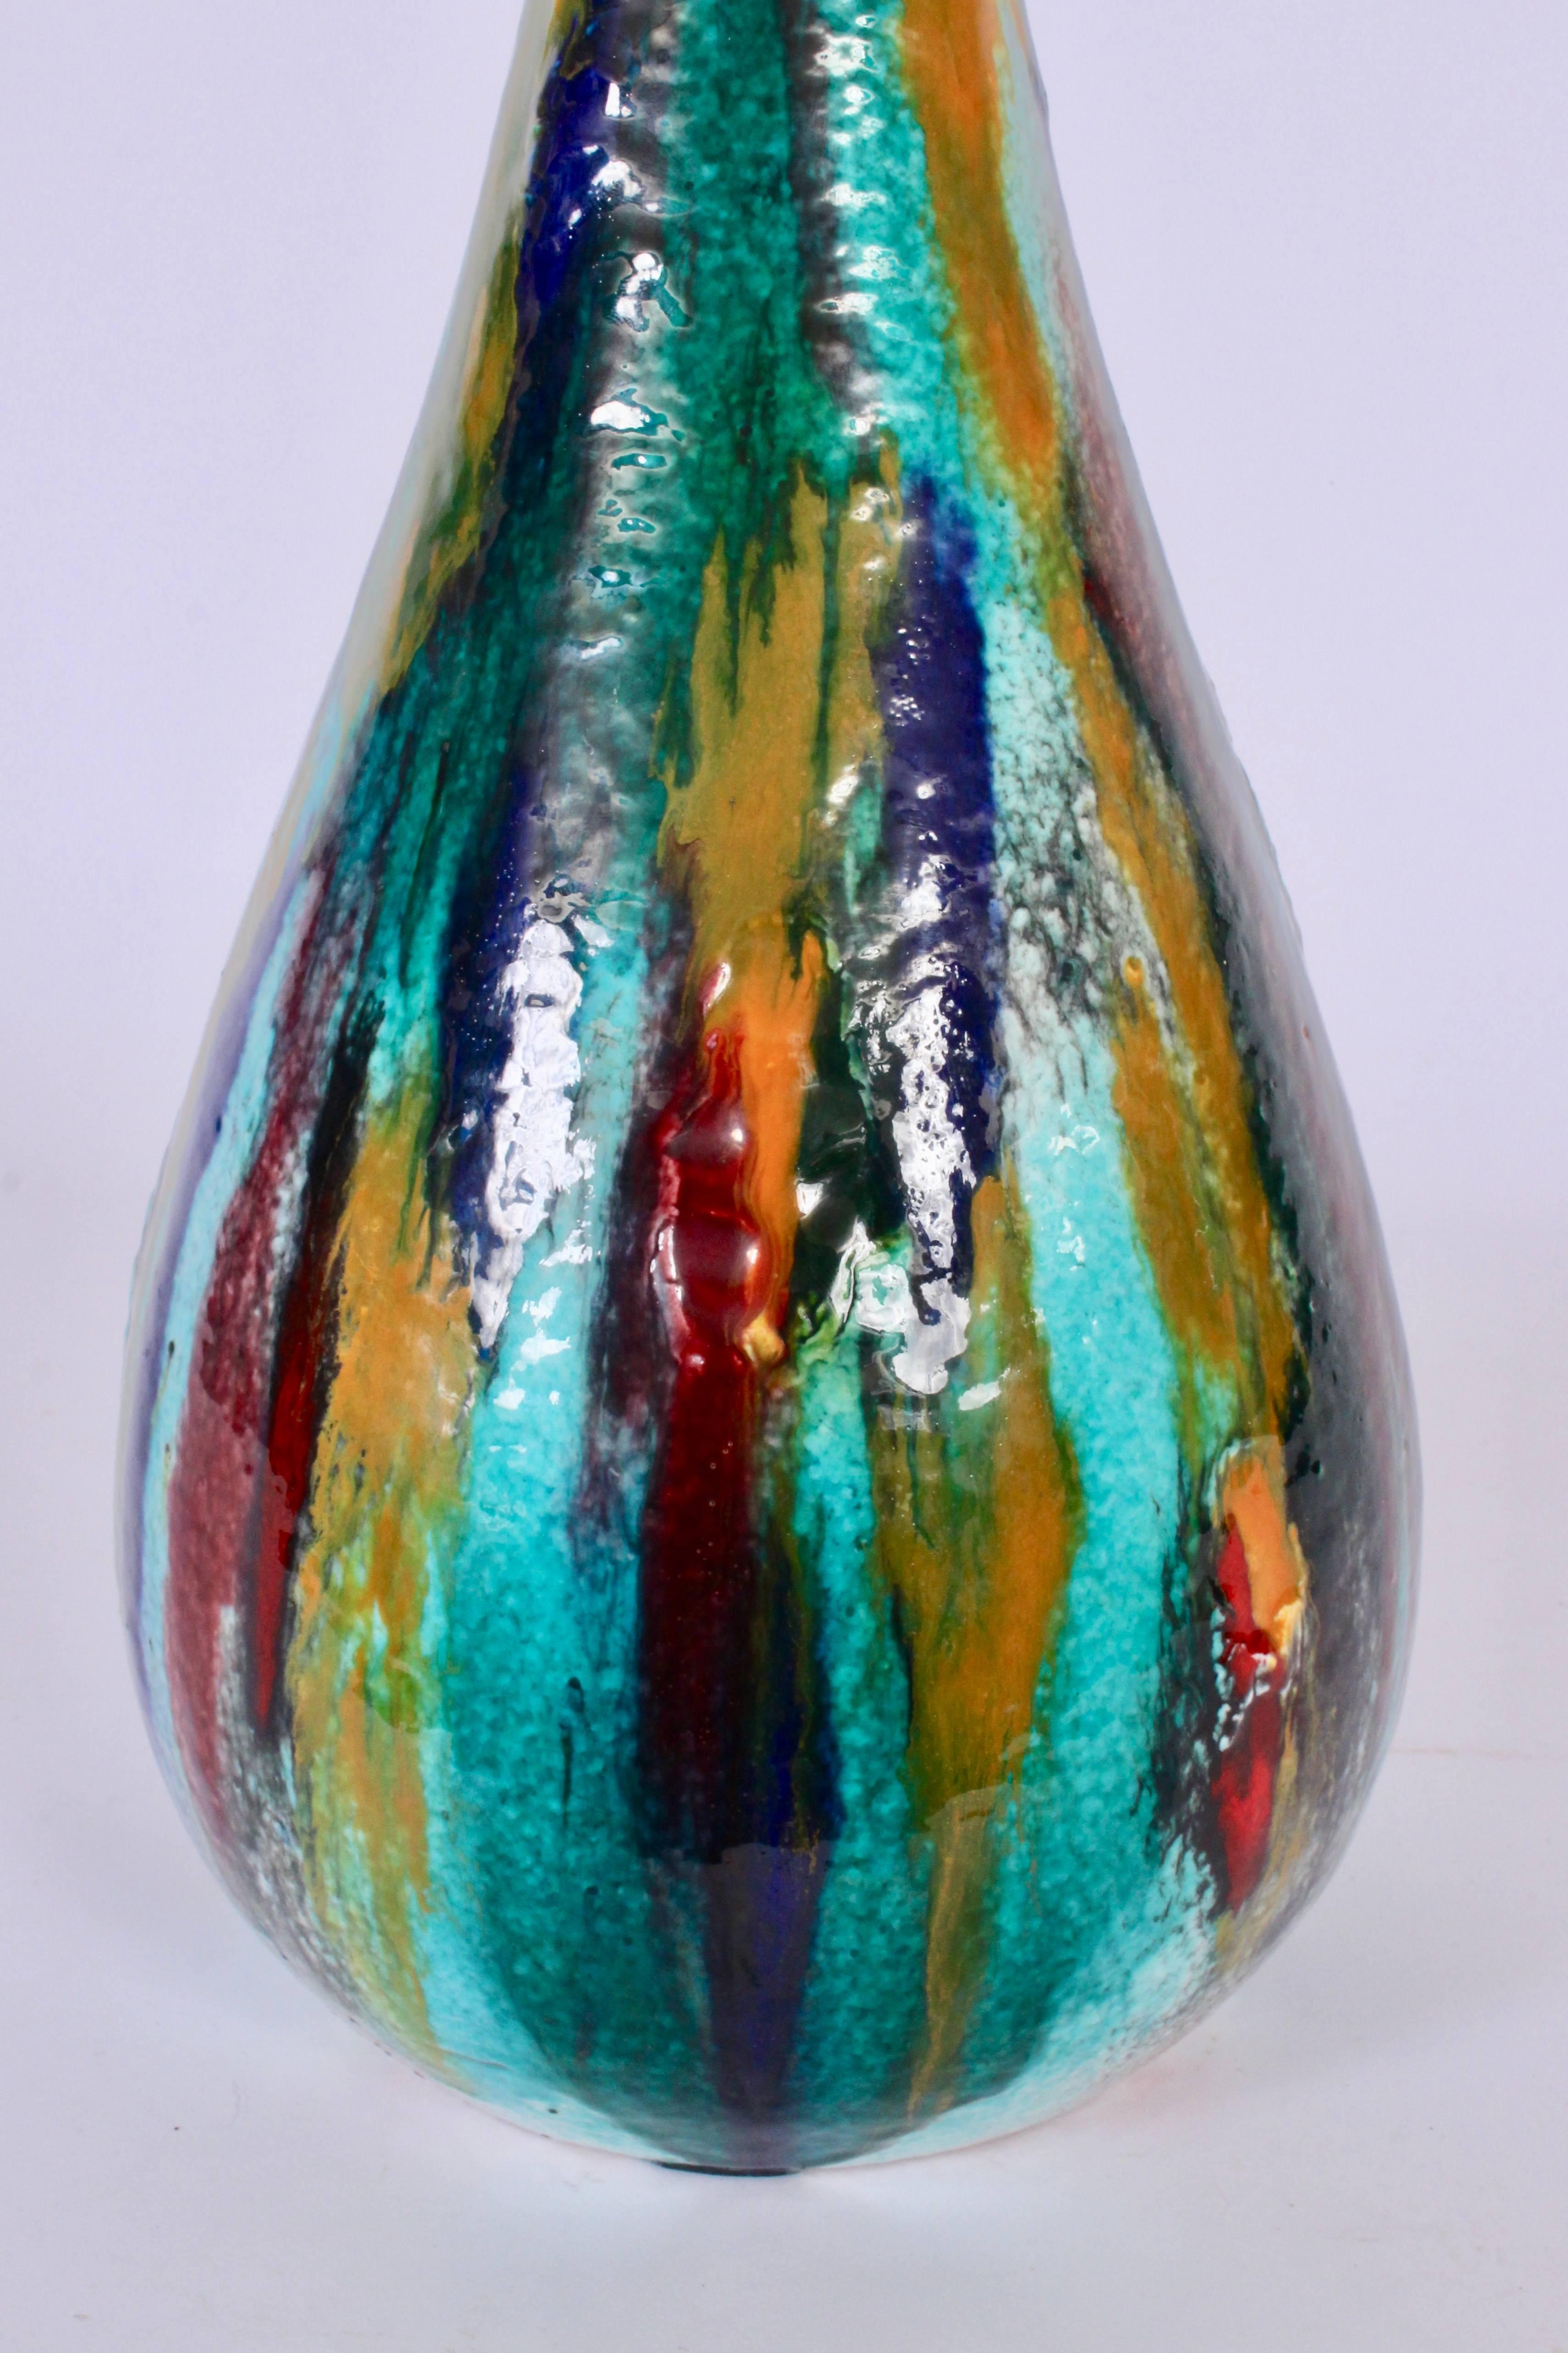 Statuesque and lively multicolored drip glazed Italian Abisola Ceramic Vase, 1950s. Featuring sea shore tones in Turquoise, Aqua, Green and Blue with Purple, Mustard and Red accents. Top 2D. Abstract. Reflective. Rarity. Made in Italy. Signed IAMA